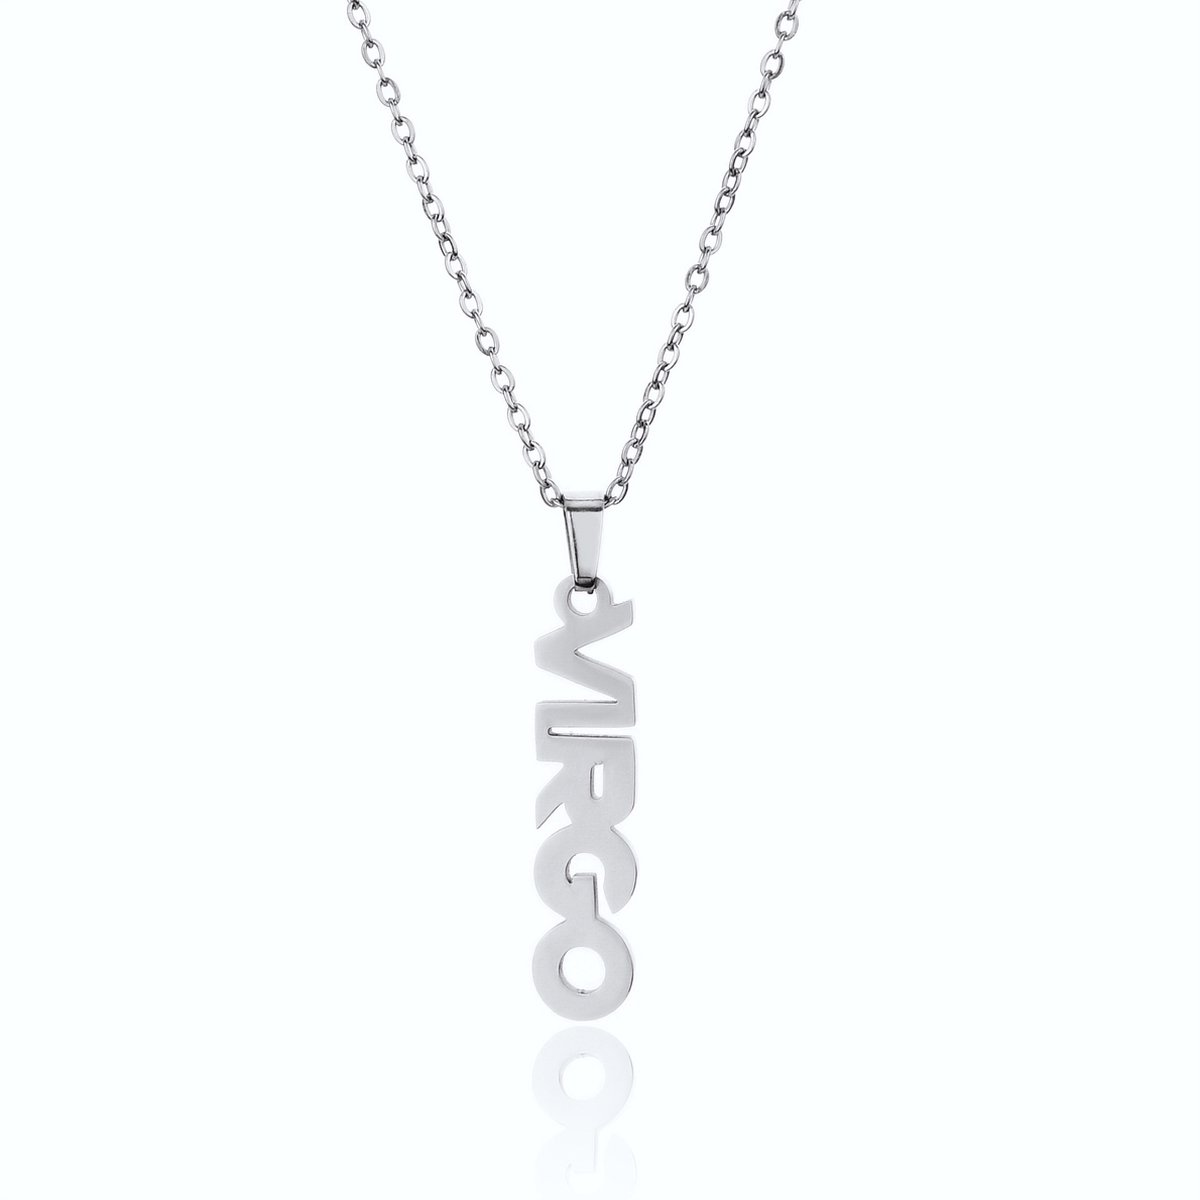 ICYBOY 18K Roestvrije Stalen Ketting Met Zodiac Sterrenbeeld Letters Pendant [Maagd] [45 cm] Silver Plating Stainless Steel Letter Necklace Vertical Horoscope Necklace